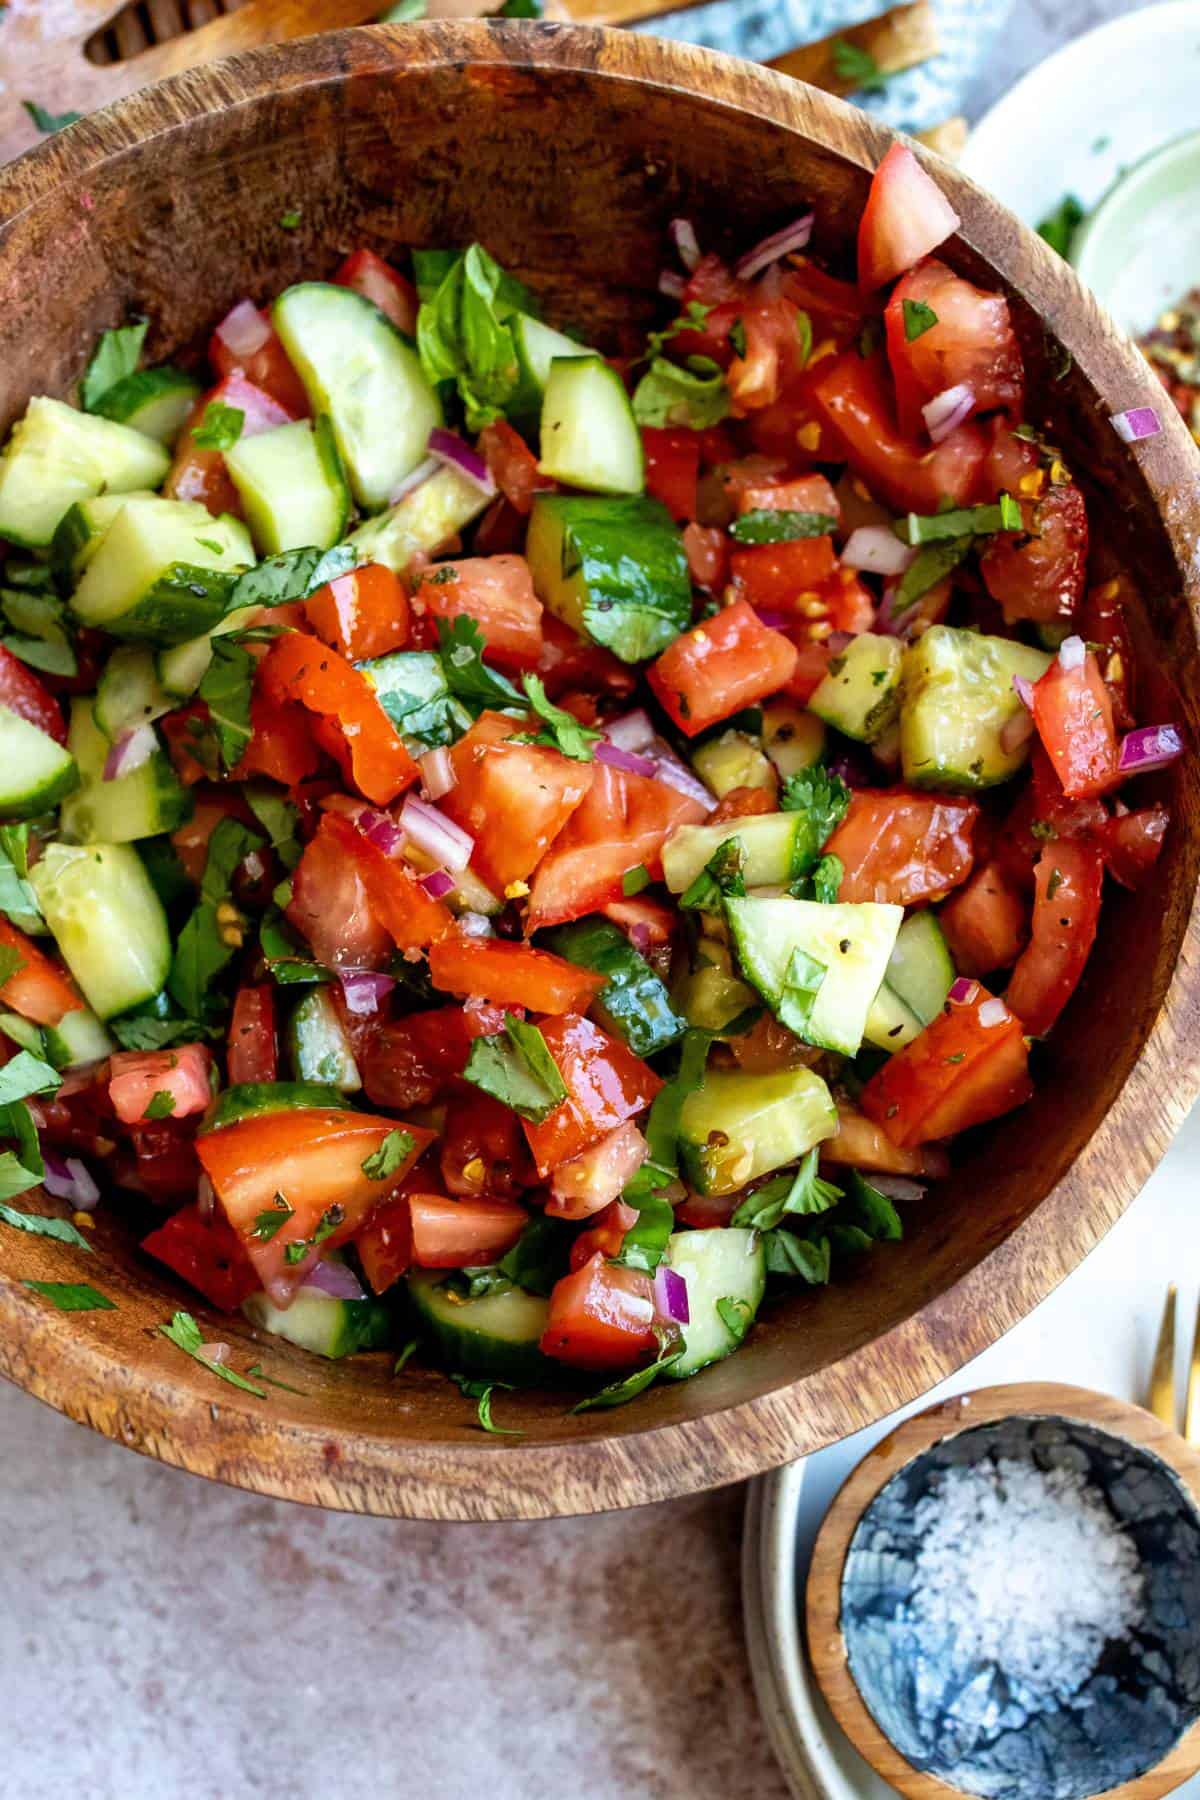 Wooden bowl with tomatoes and cucumber in it, red pepper flakes on the side.